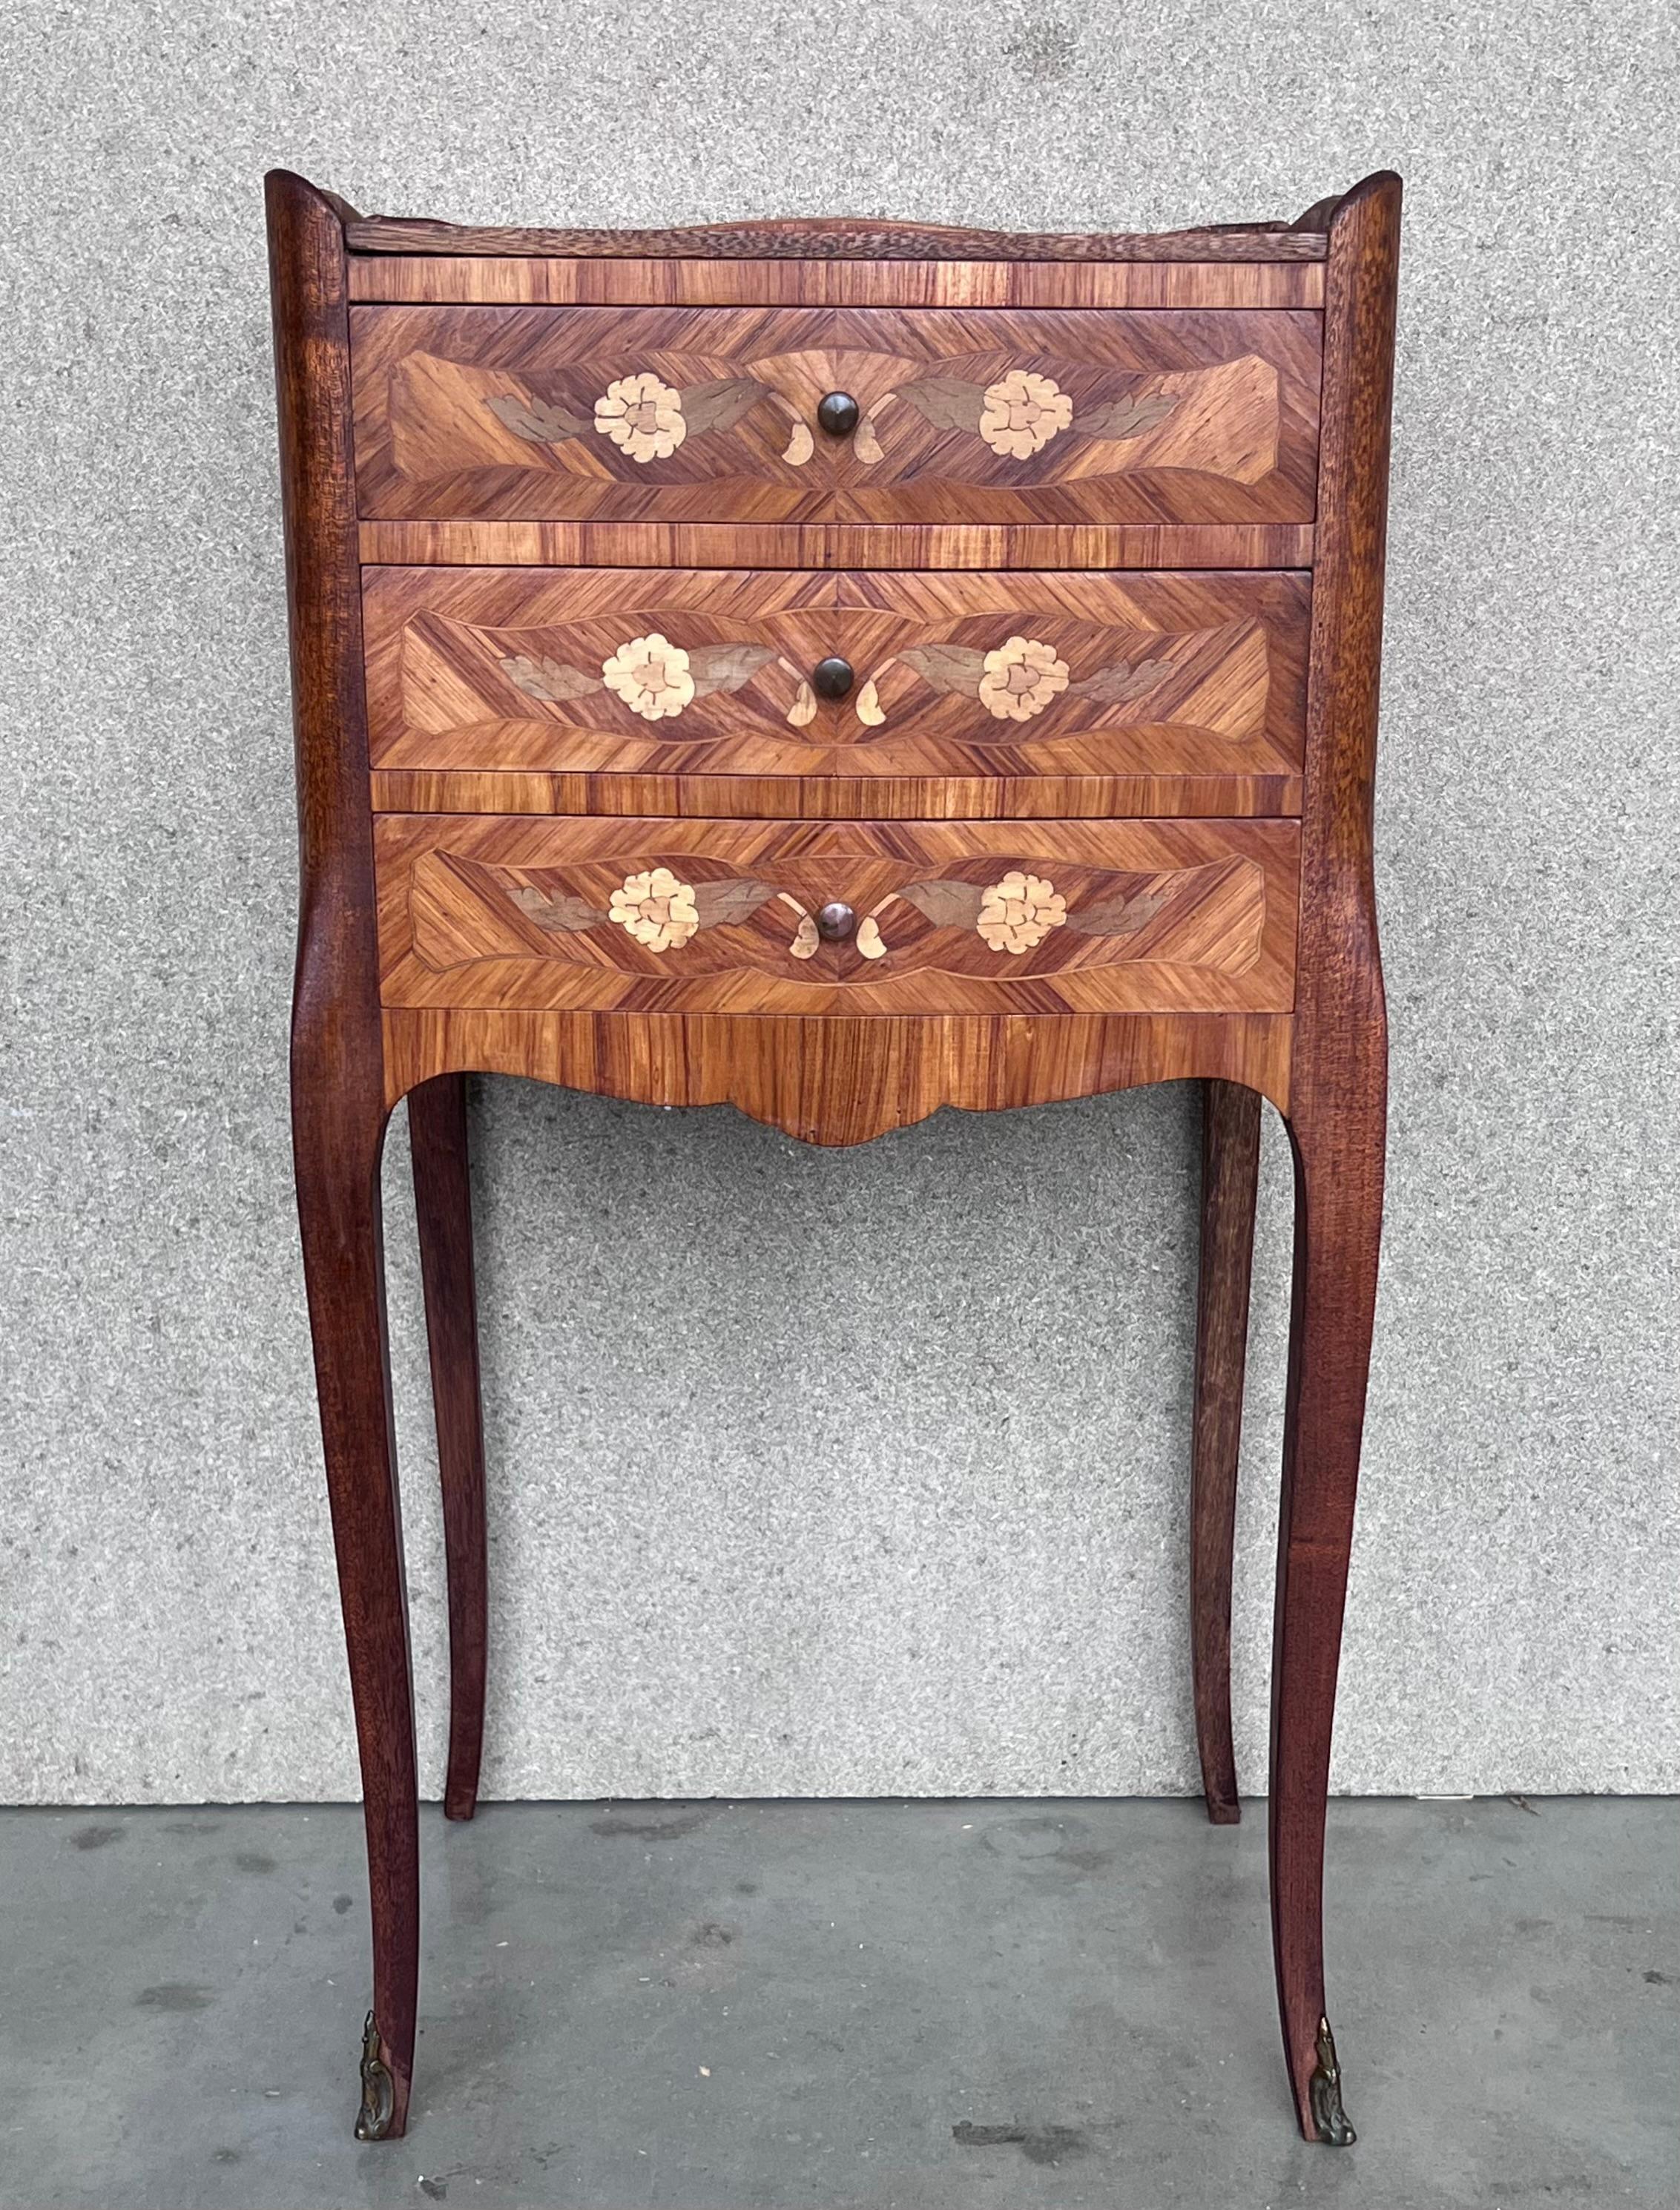 Louis XV 20th Century Pair of Marquetry Walnut Bedside, Nightstands Tables with Drawers For Sale